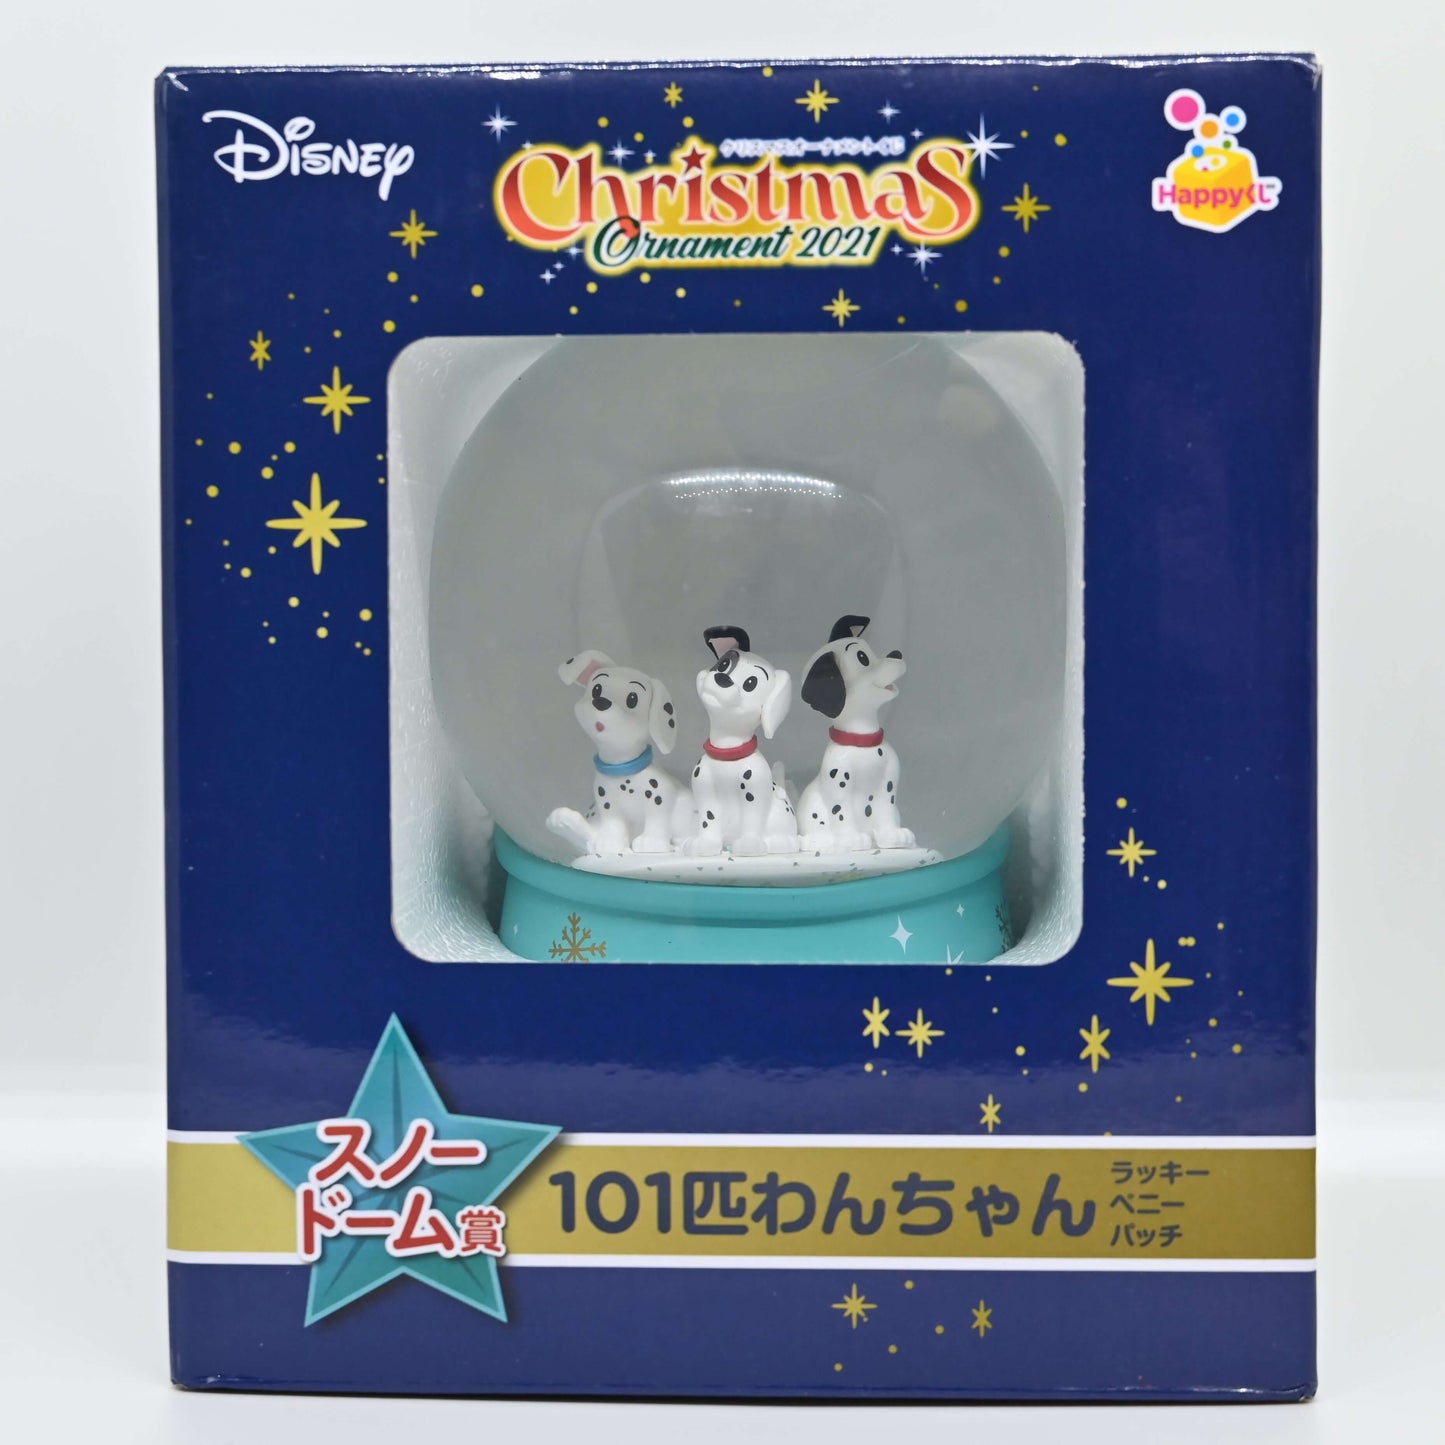 101 Dog Christmas Collection Crystal Ball Ornament 2021 [In stock]